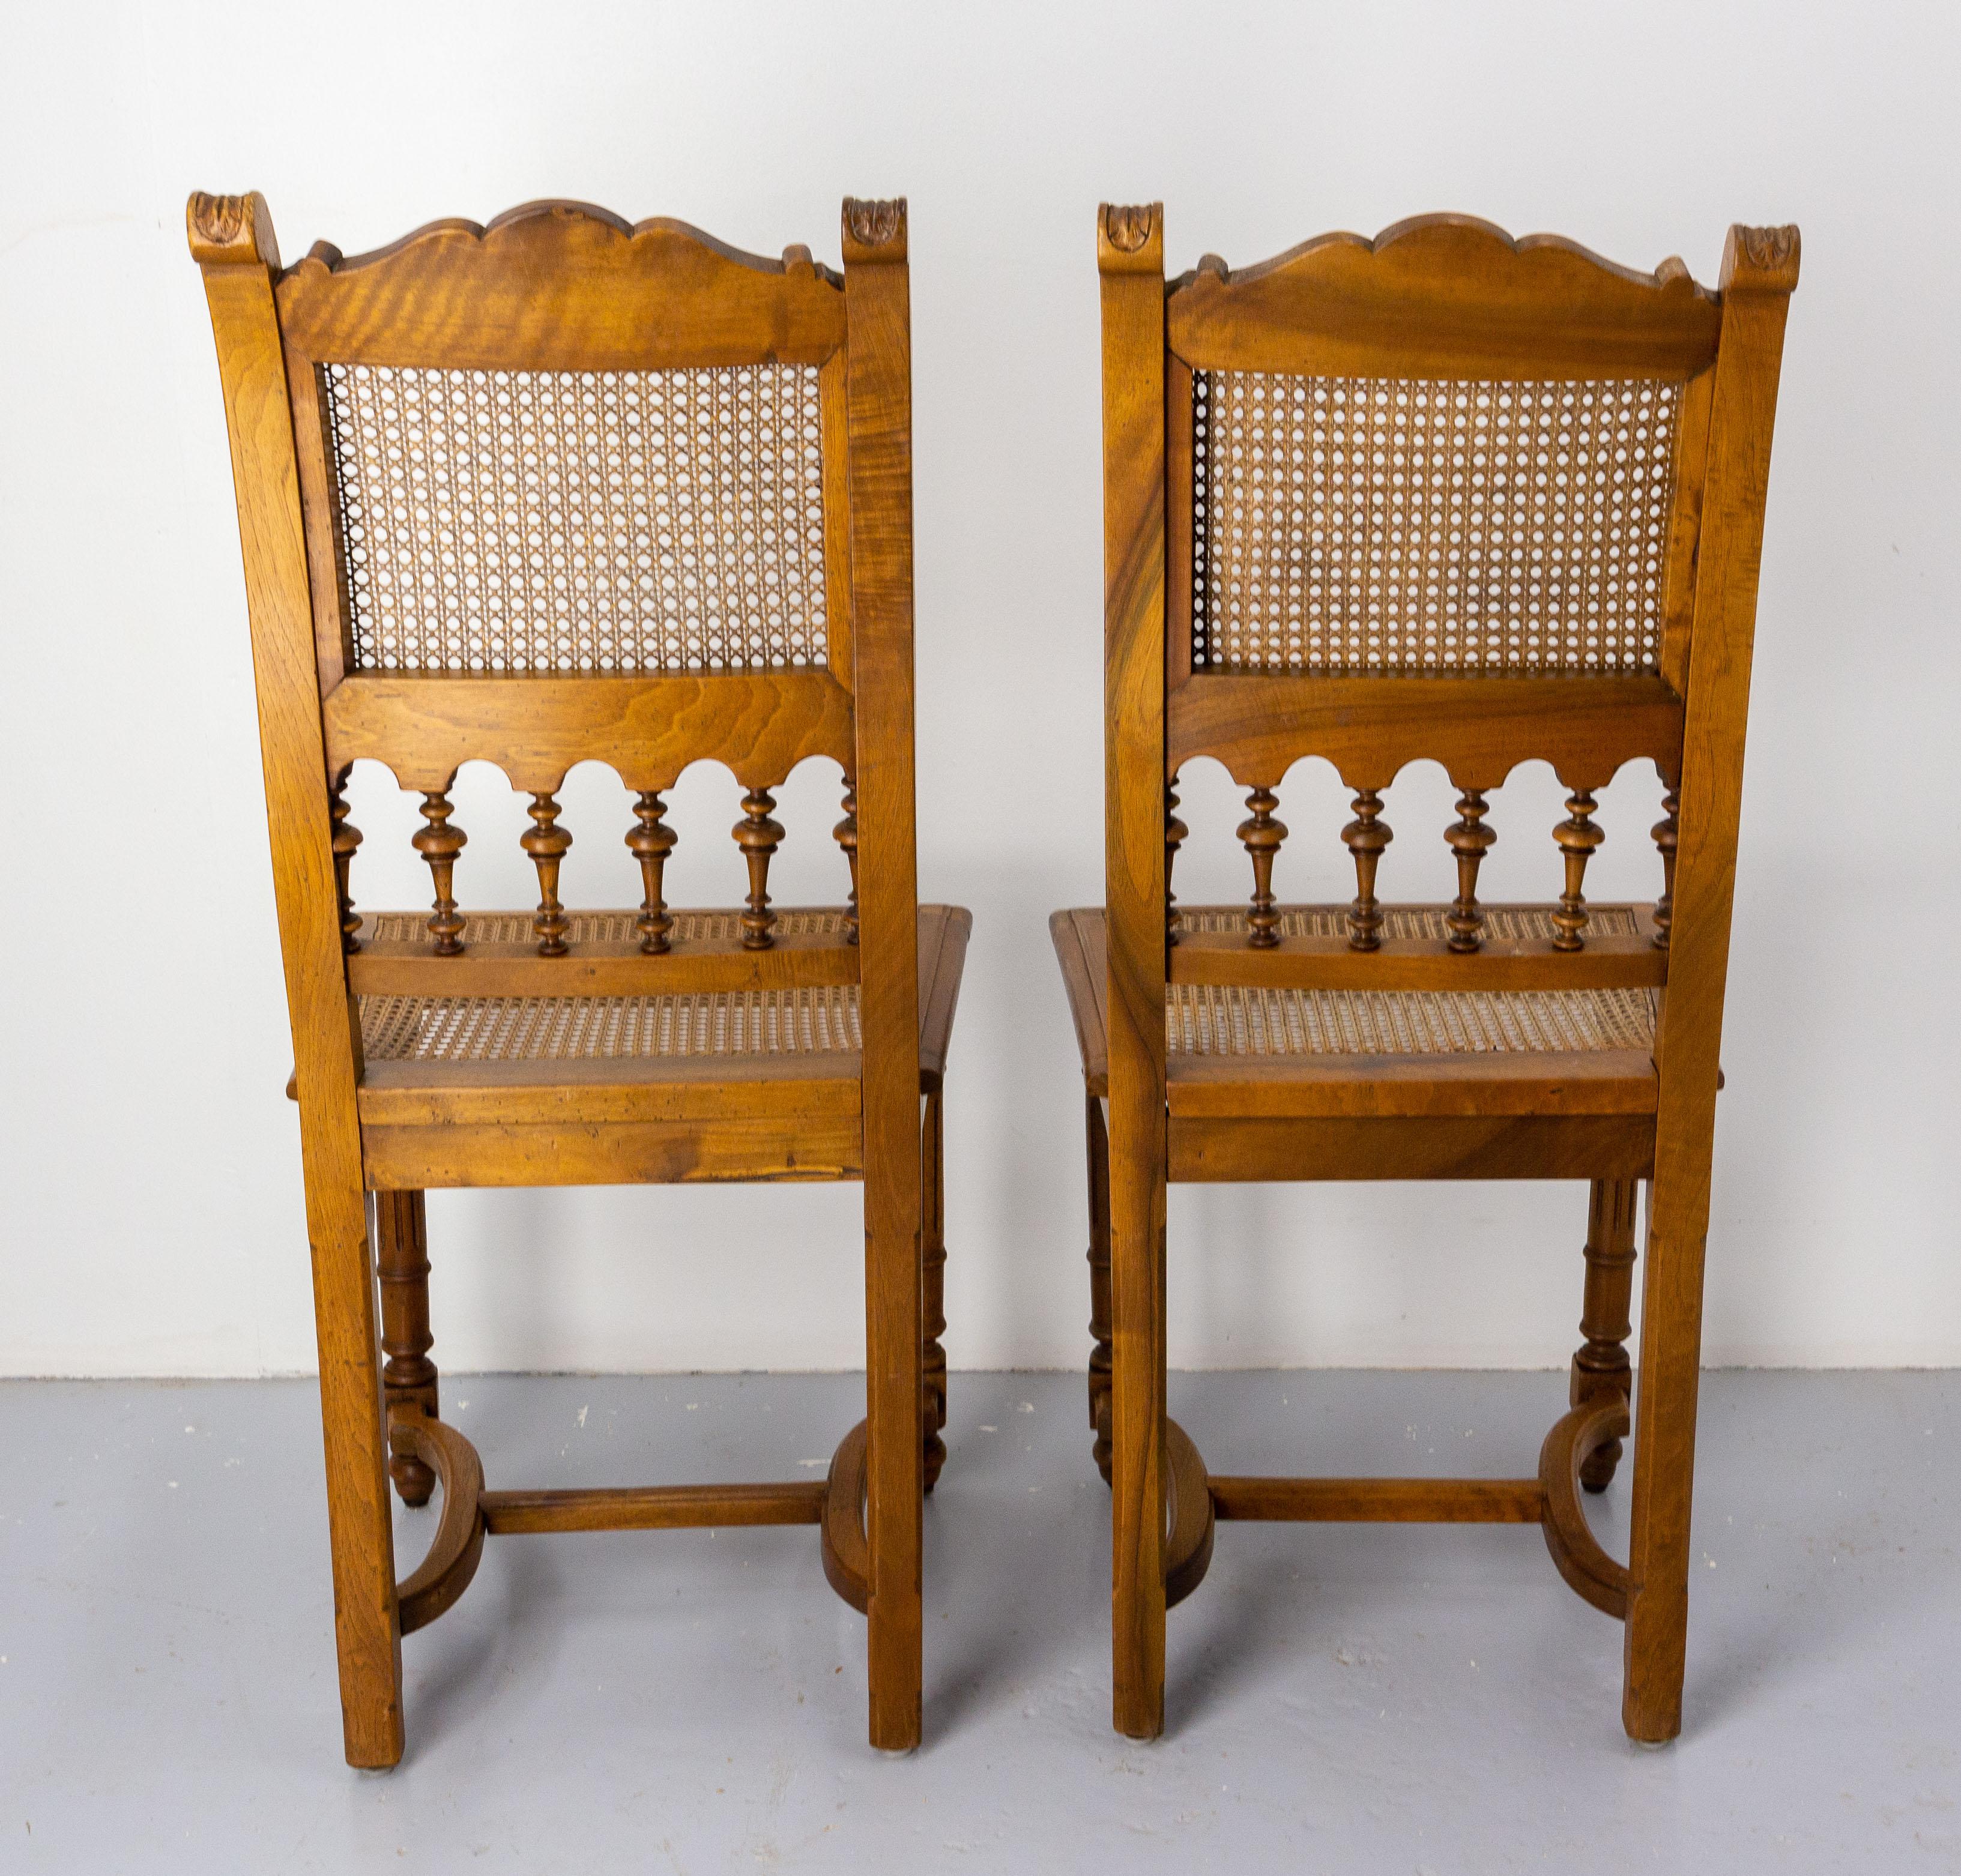 Four Chairs Walnut and Cane in the Louis XIII Style, French, circa 1900 For Sale 3